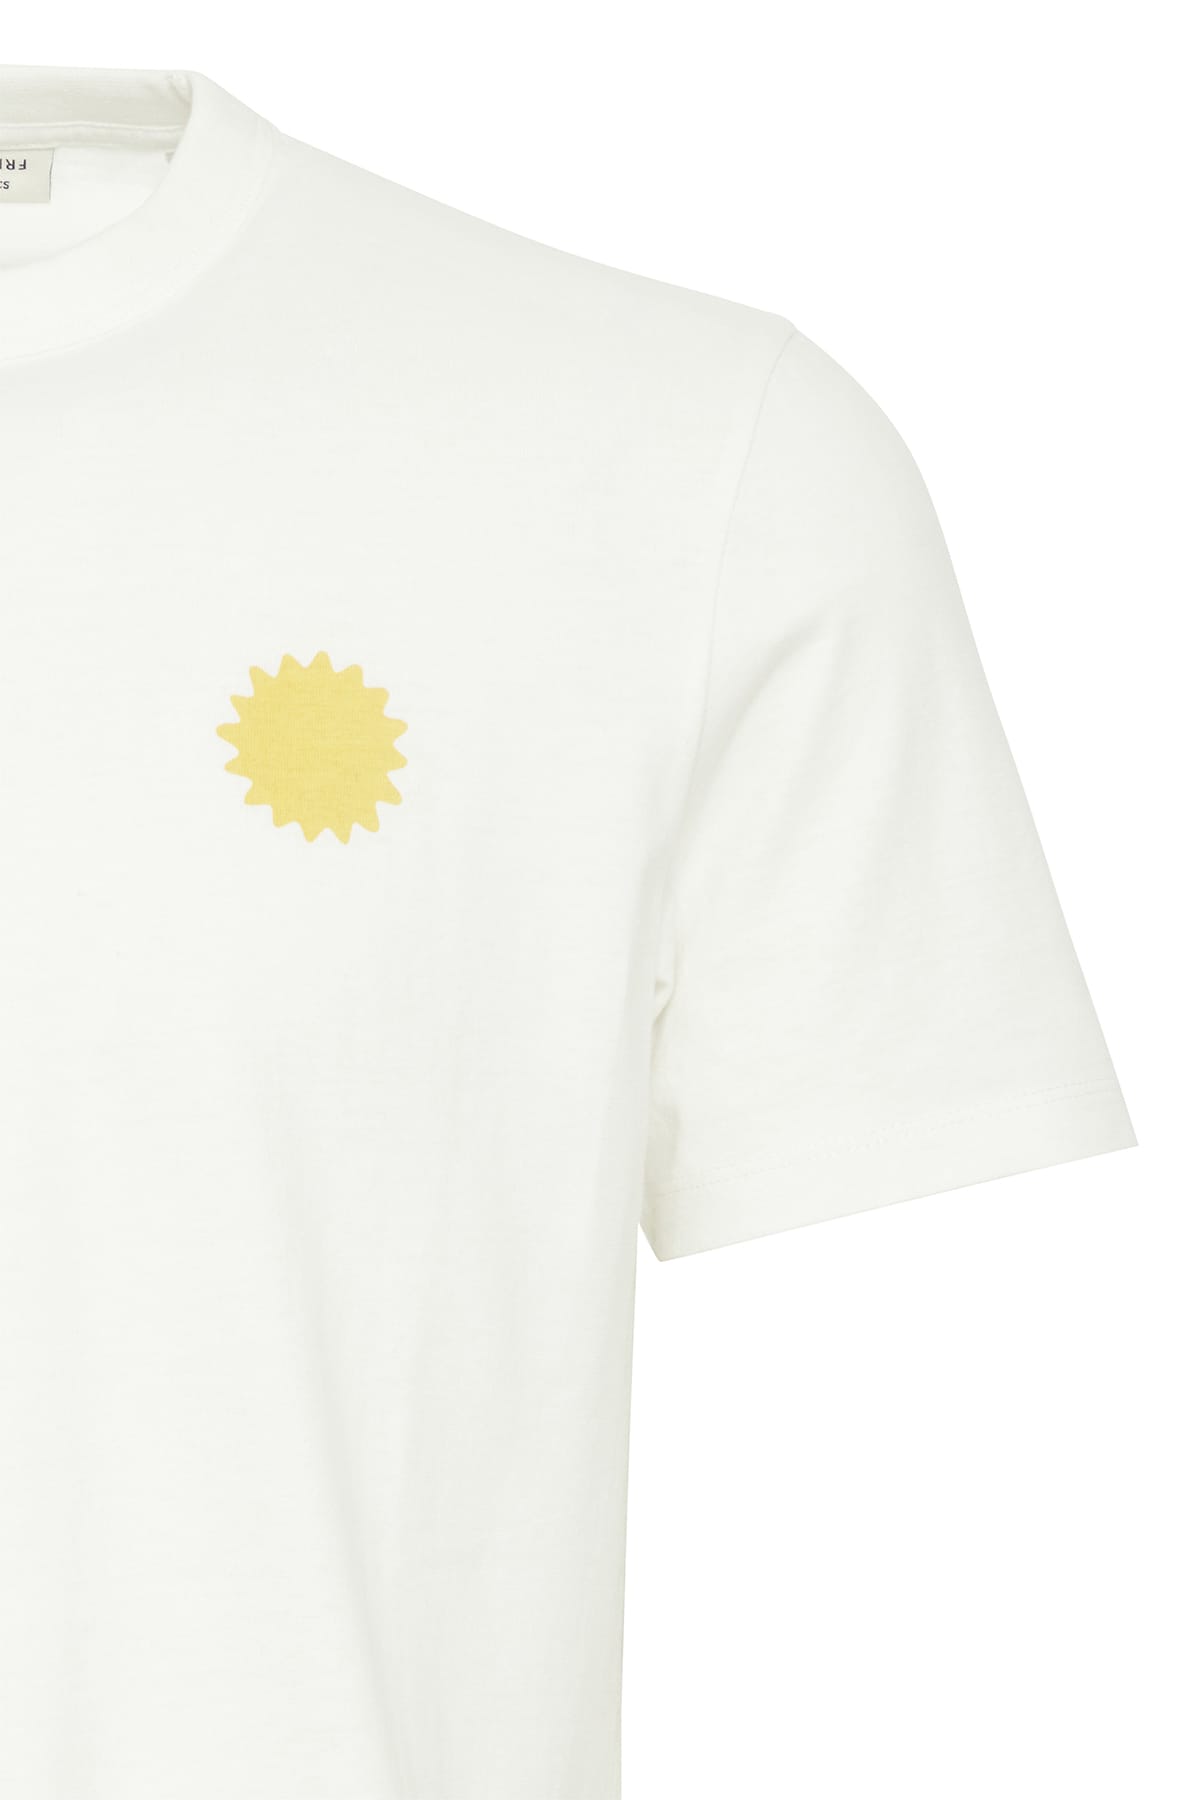 T-Shirt CFThor tee with SUN print Snow White T-Shirt Casual Friday 